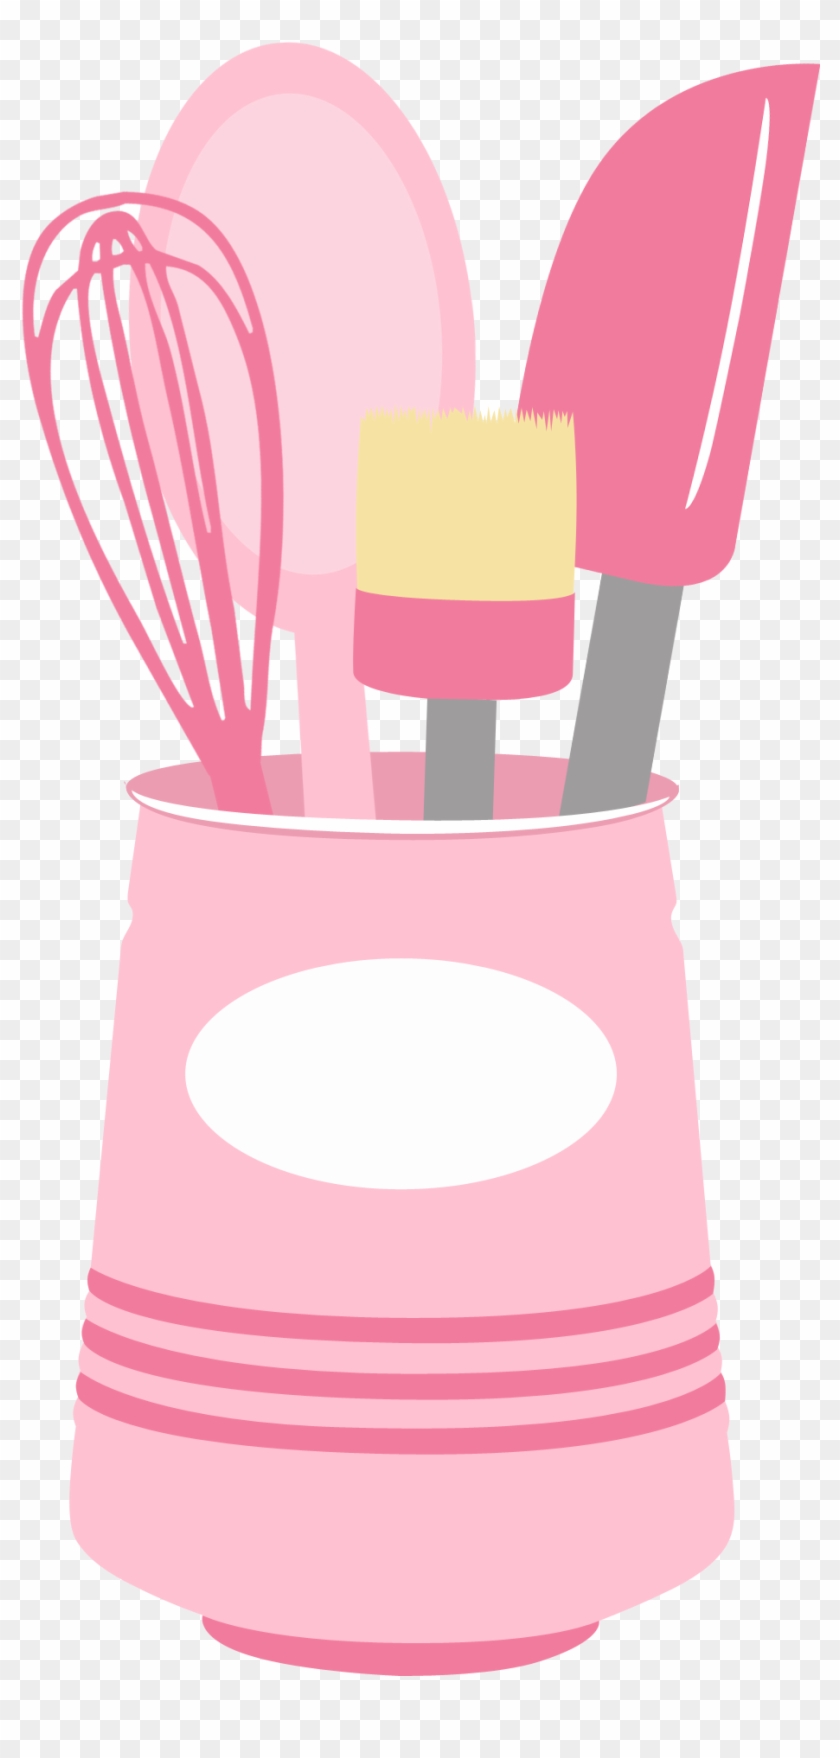 Pink Whisk Clipart - Pink Whisk Clipart #1050108